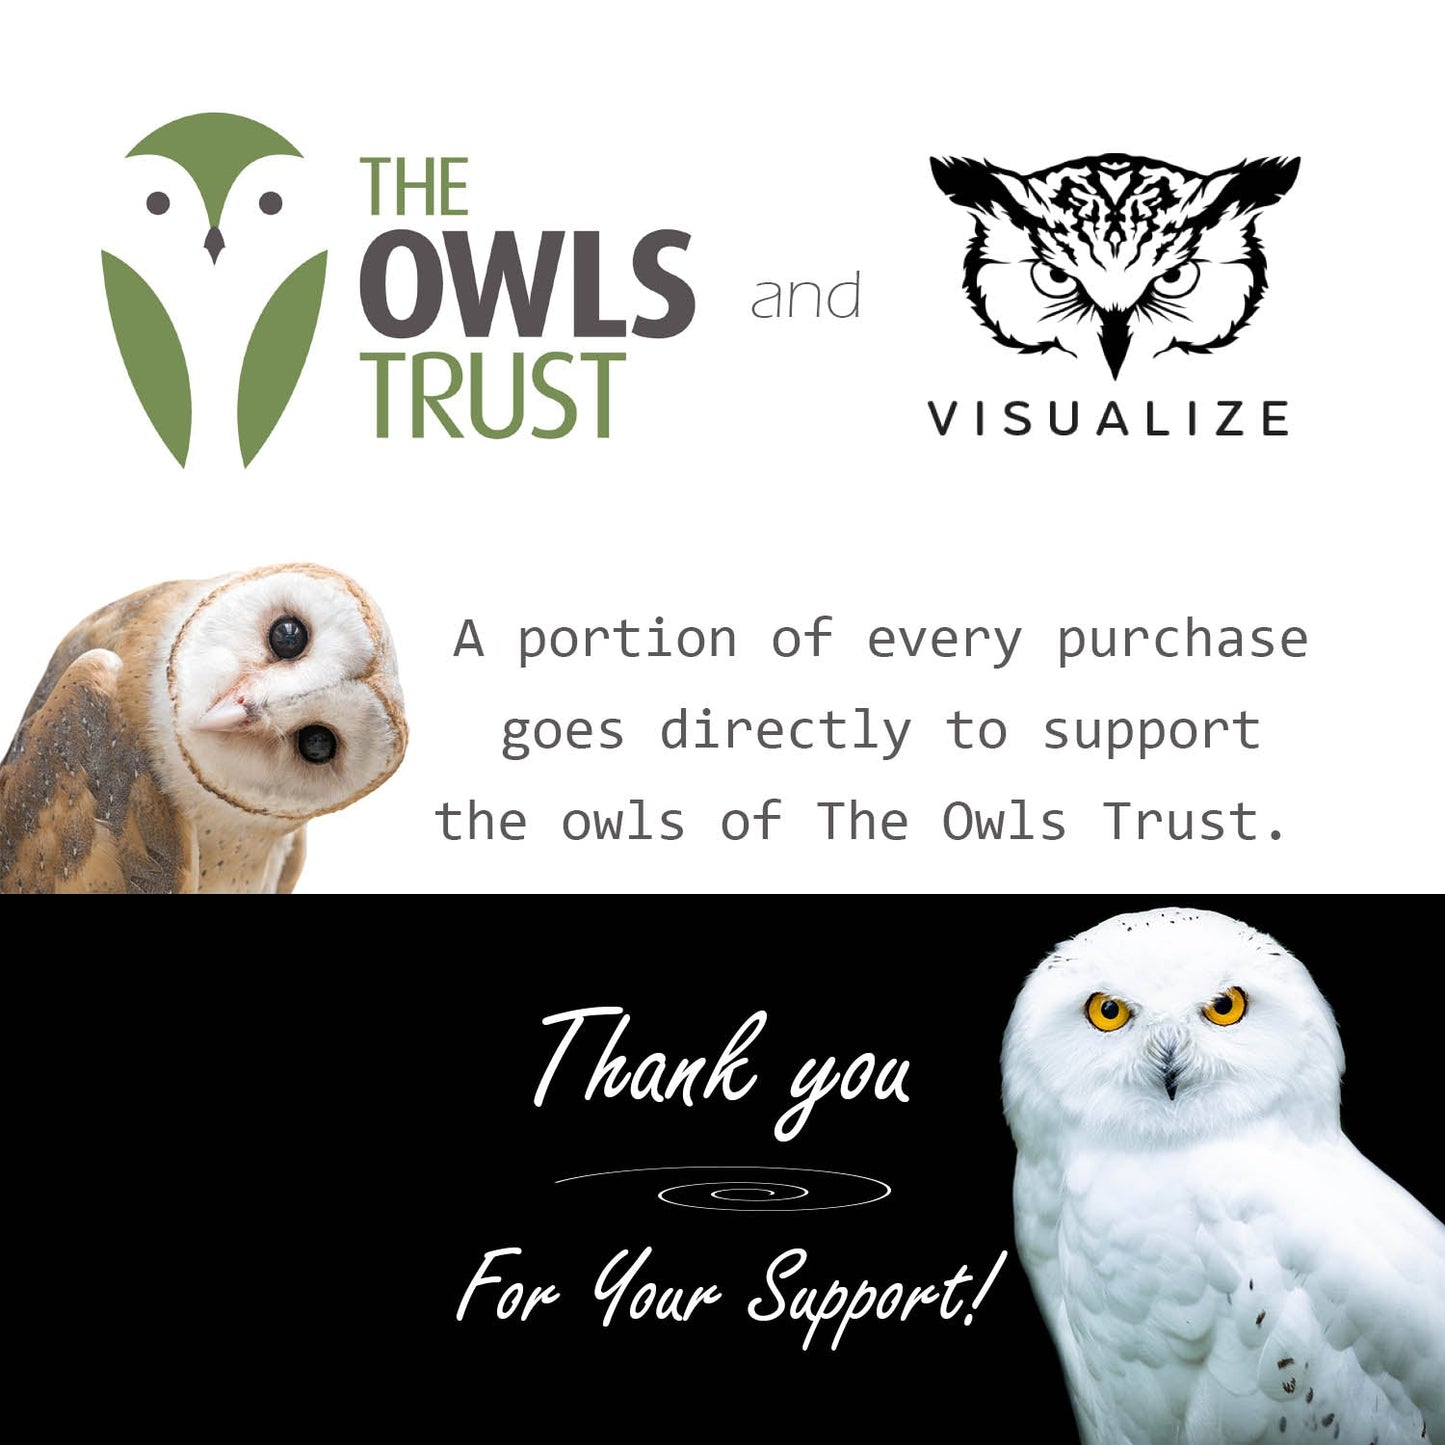 Thank you for supporting the OWLS TRUST! 